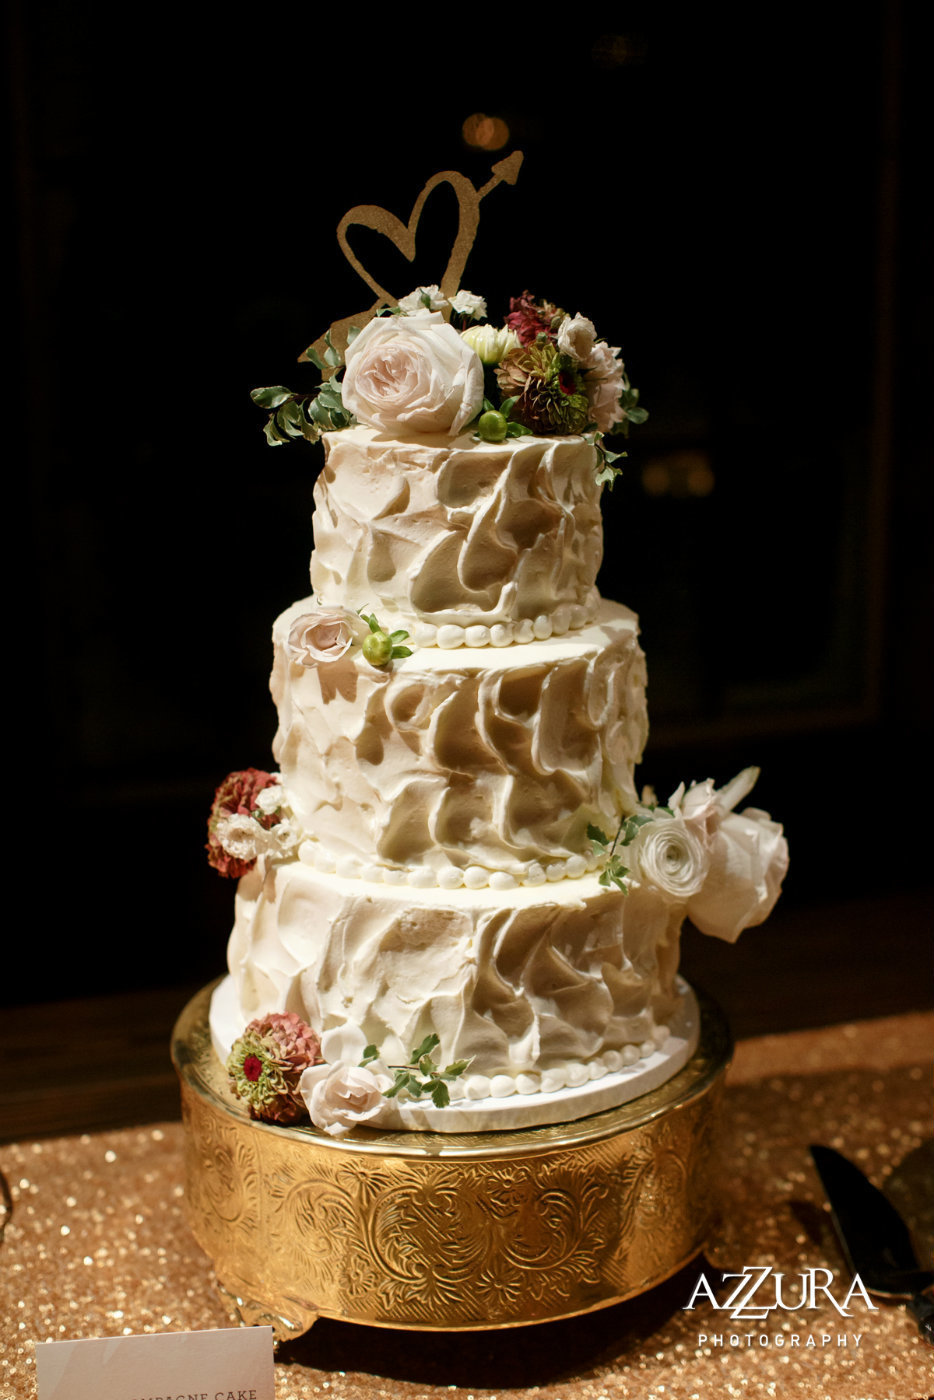 3 tiered wedding cake with fresh flowers